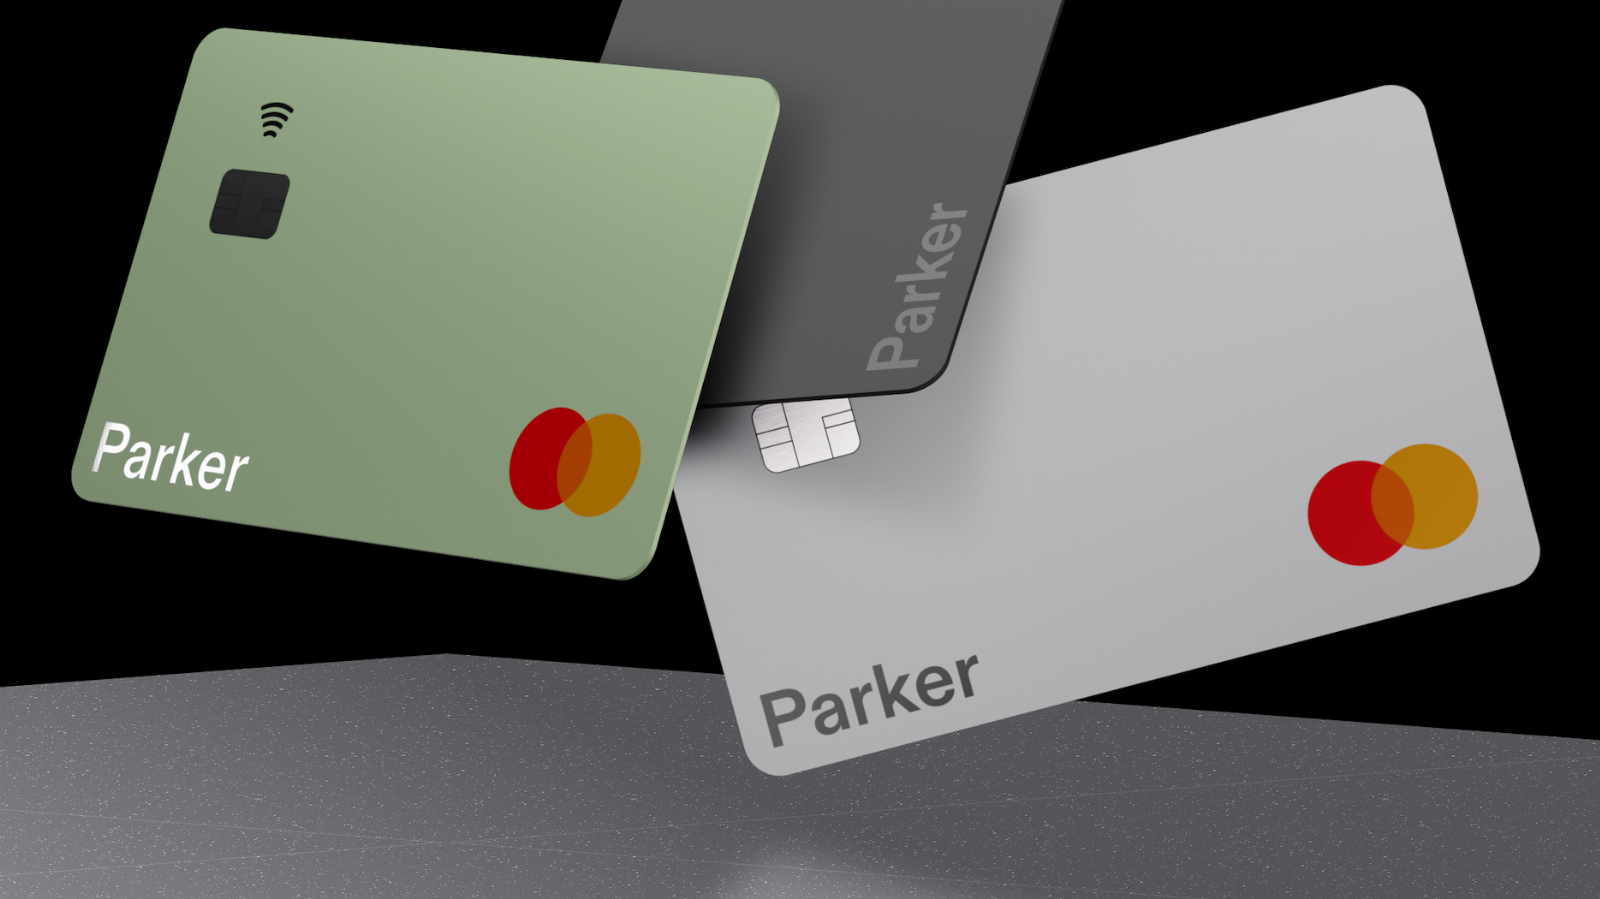 Here’s a new corporate card startup, backed by $157M in equity, debt, going after Brex, Ramp